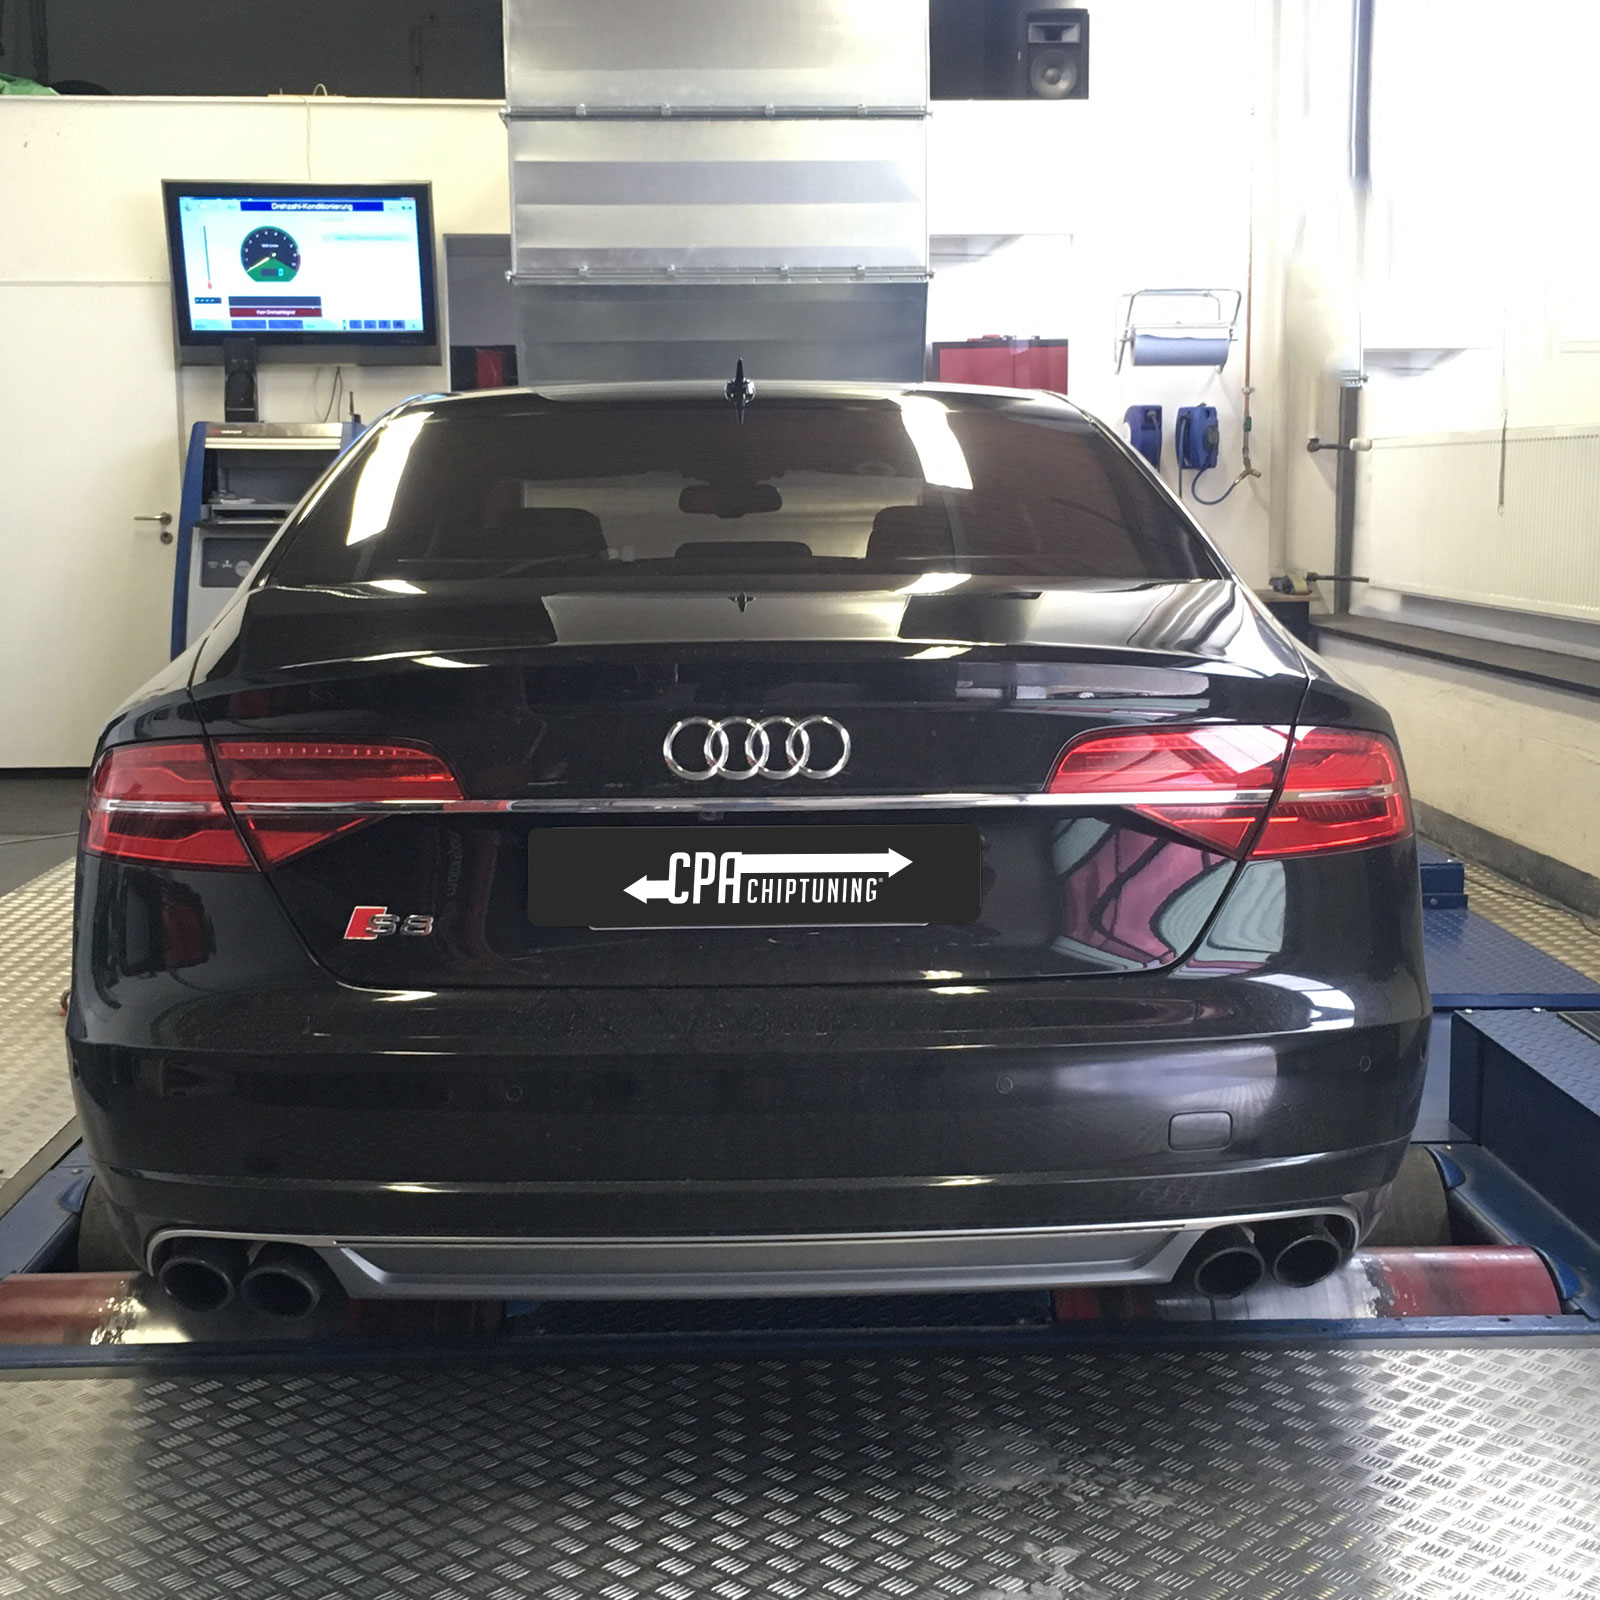 Luxury liner gets more steam: Audi S8 Plus with CPA PowerBox